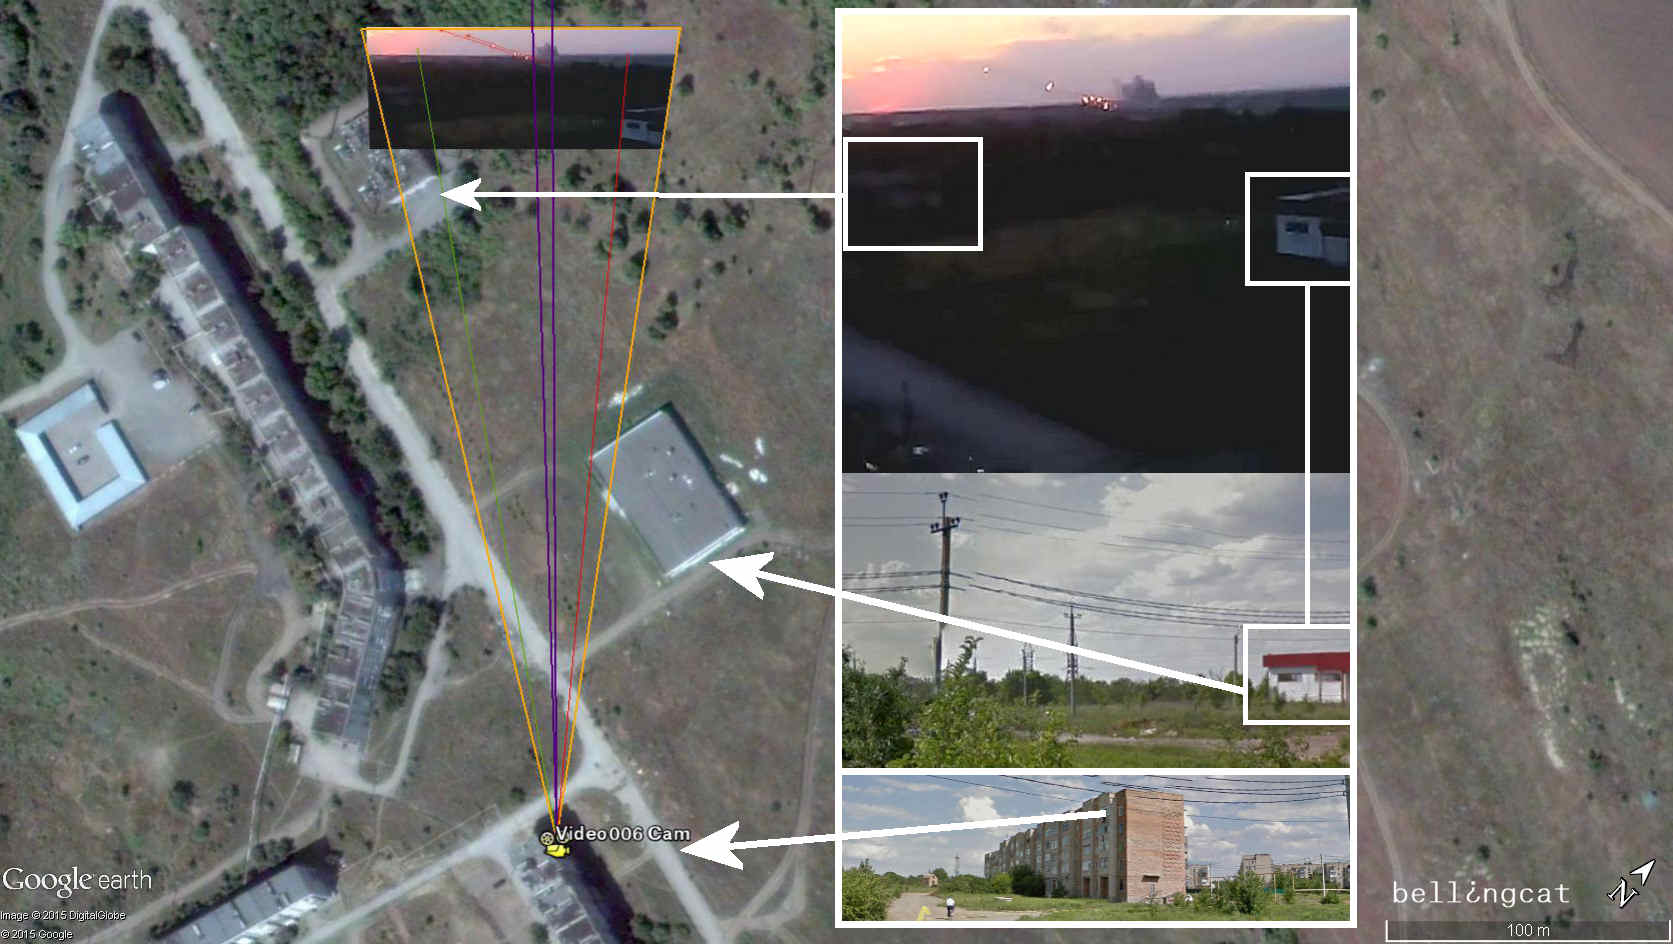 Camera location of Video006 –dark purple lines show the direction of the firing position